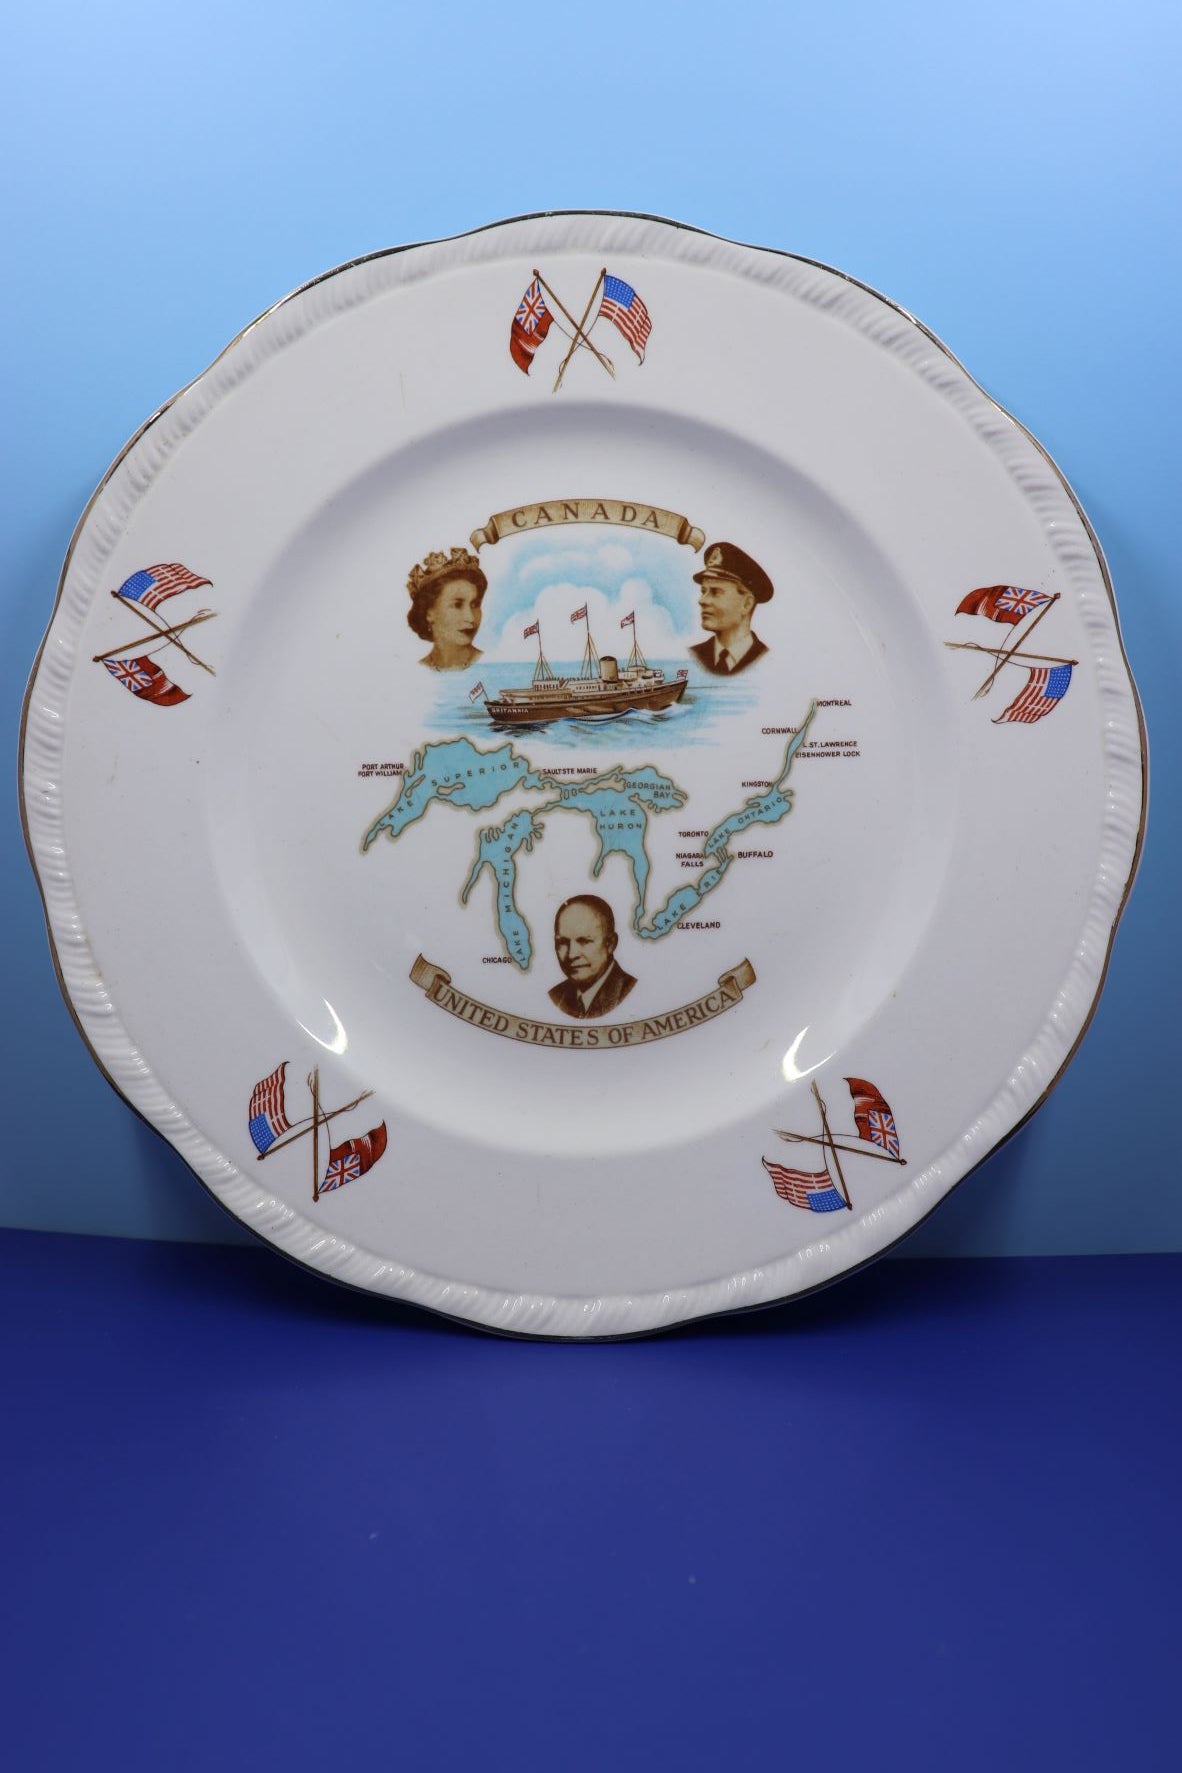 Opening Of The St. Lawrence Seaway Commemorative Plate